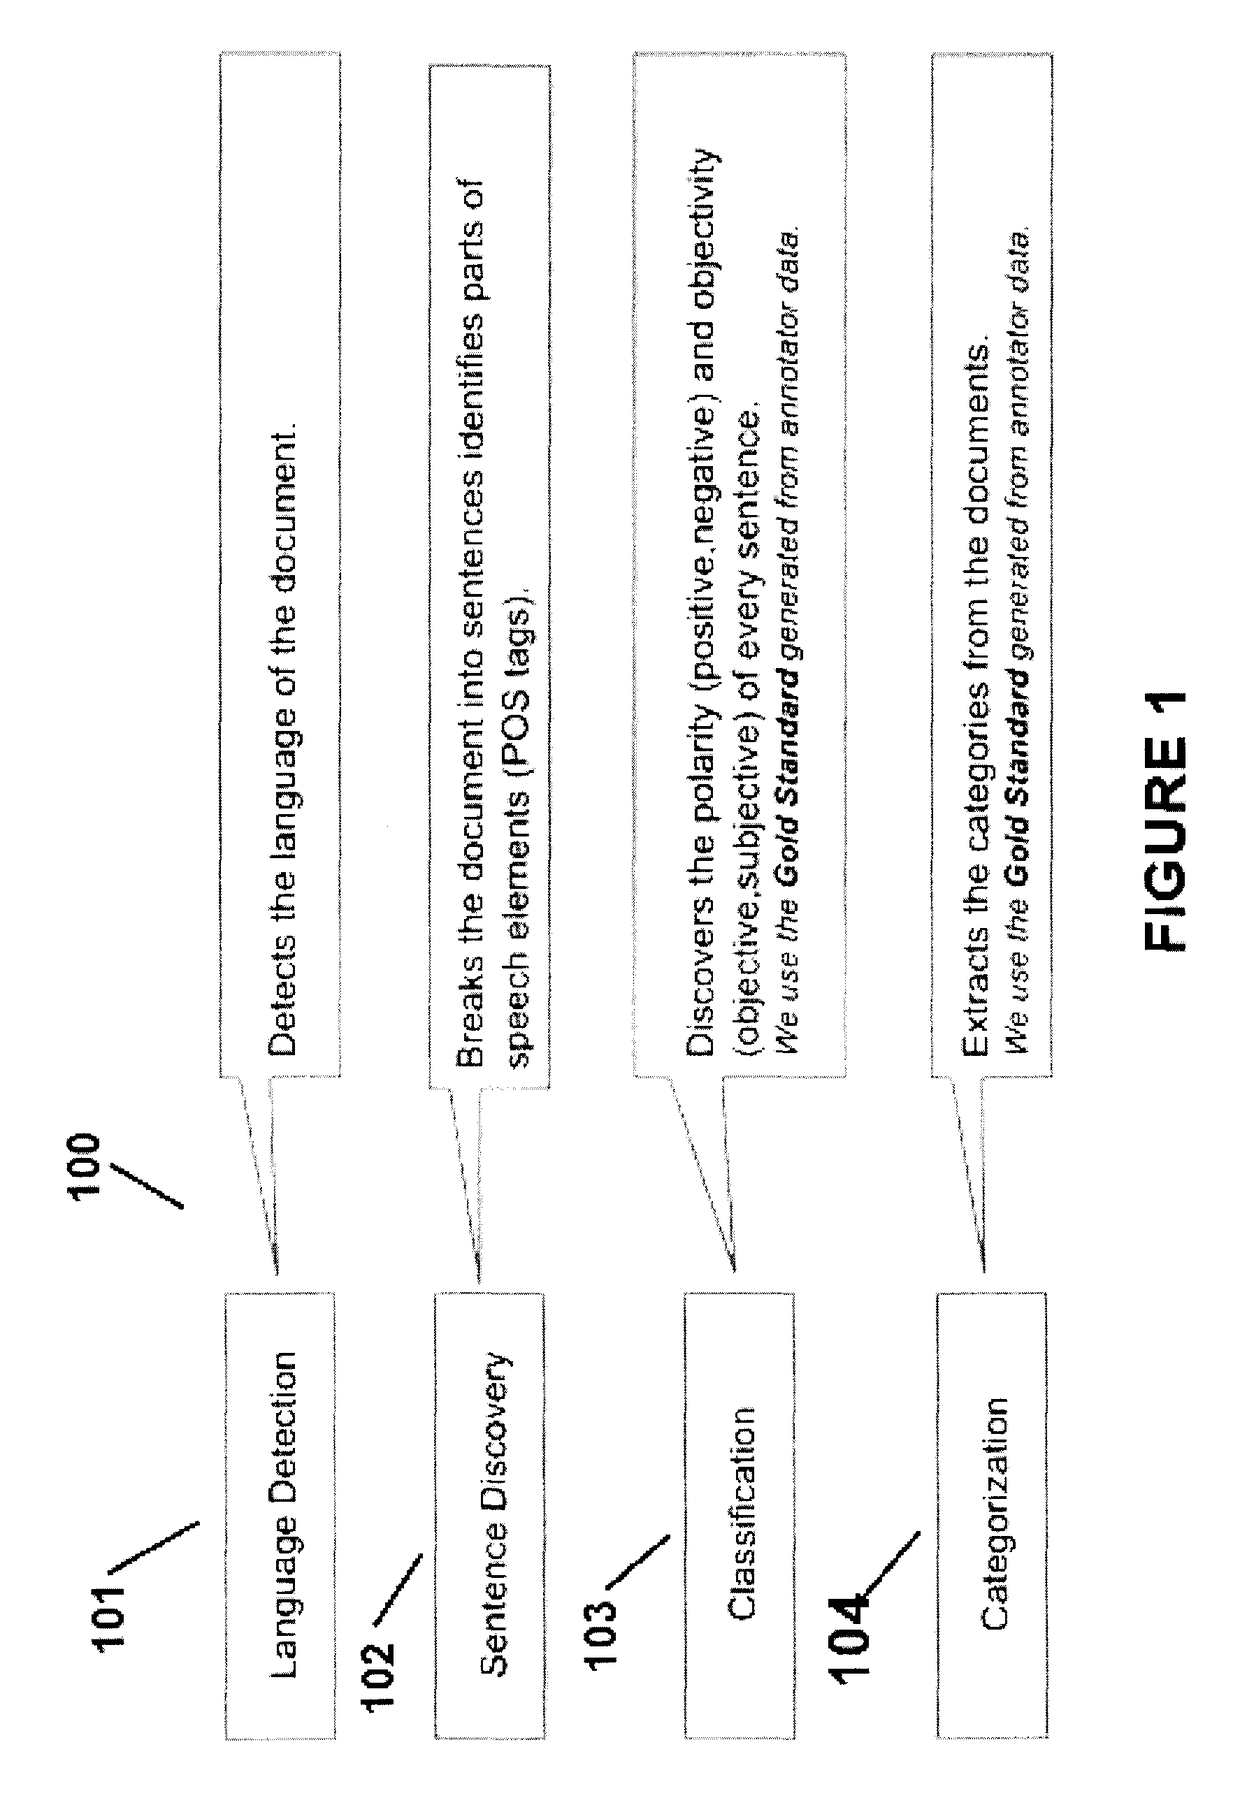 Method and system for monitoring social media and analyzing text to automate classification of user posts using a facet based relevance assessment model